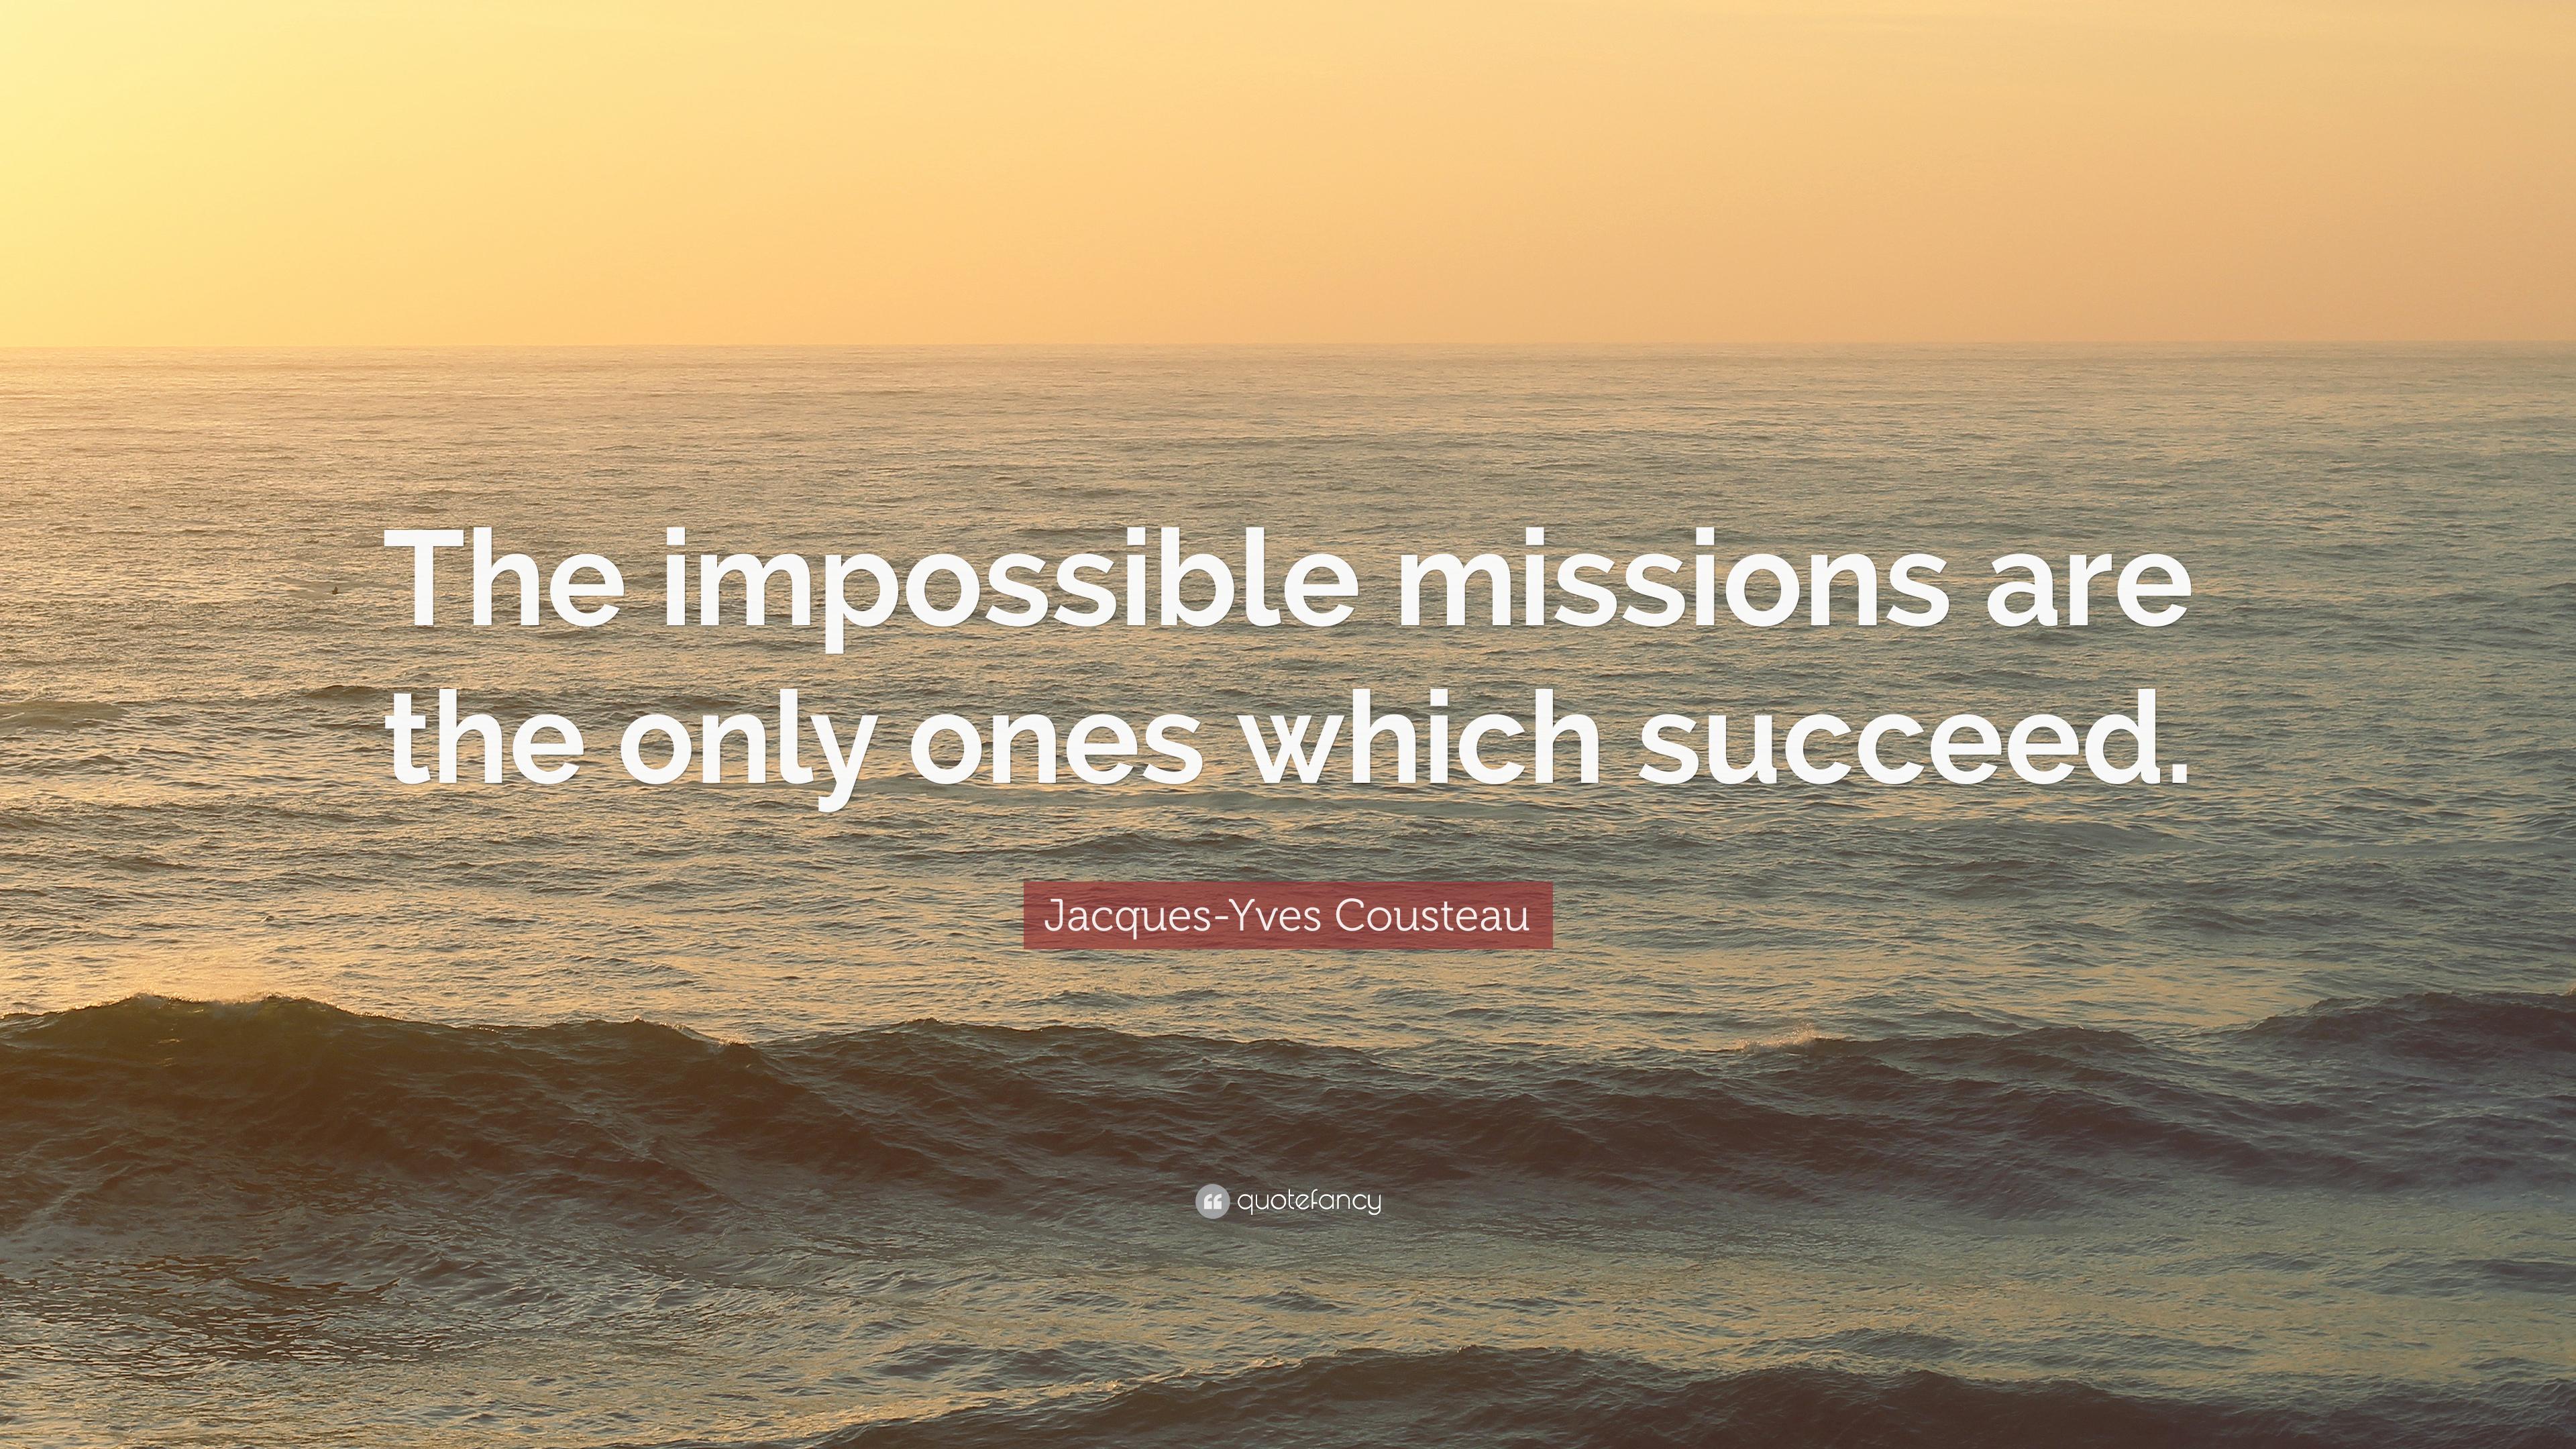 Jacques Yves Cousteau Quote: “The Impossible Missions Are The Only